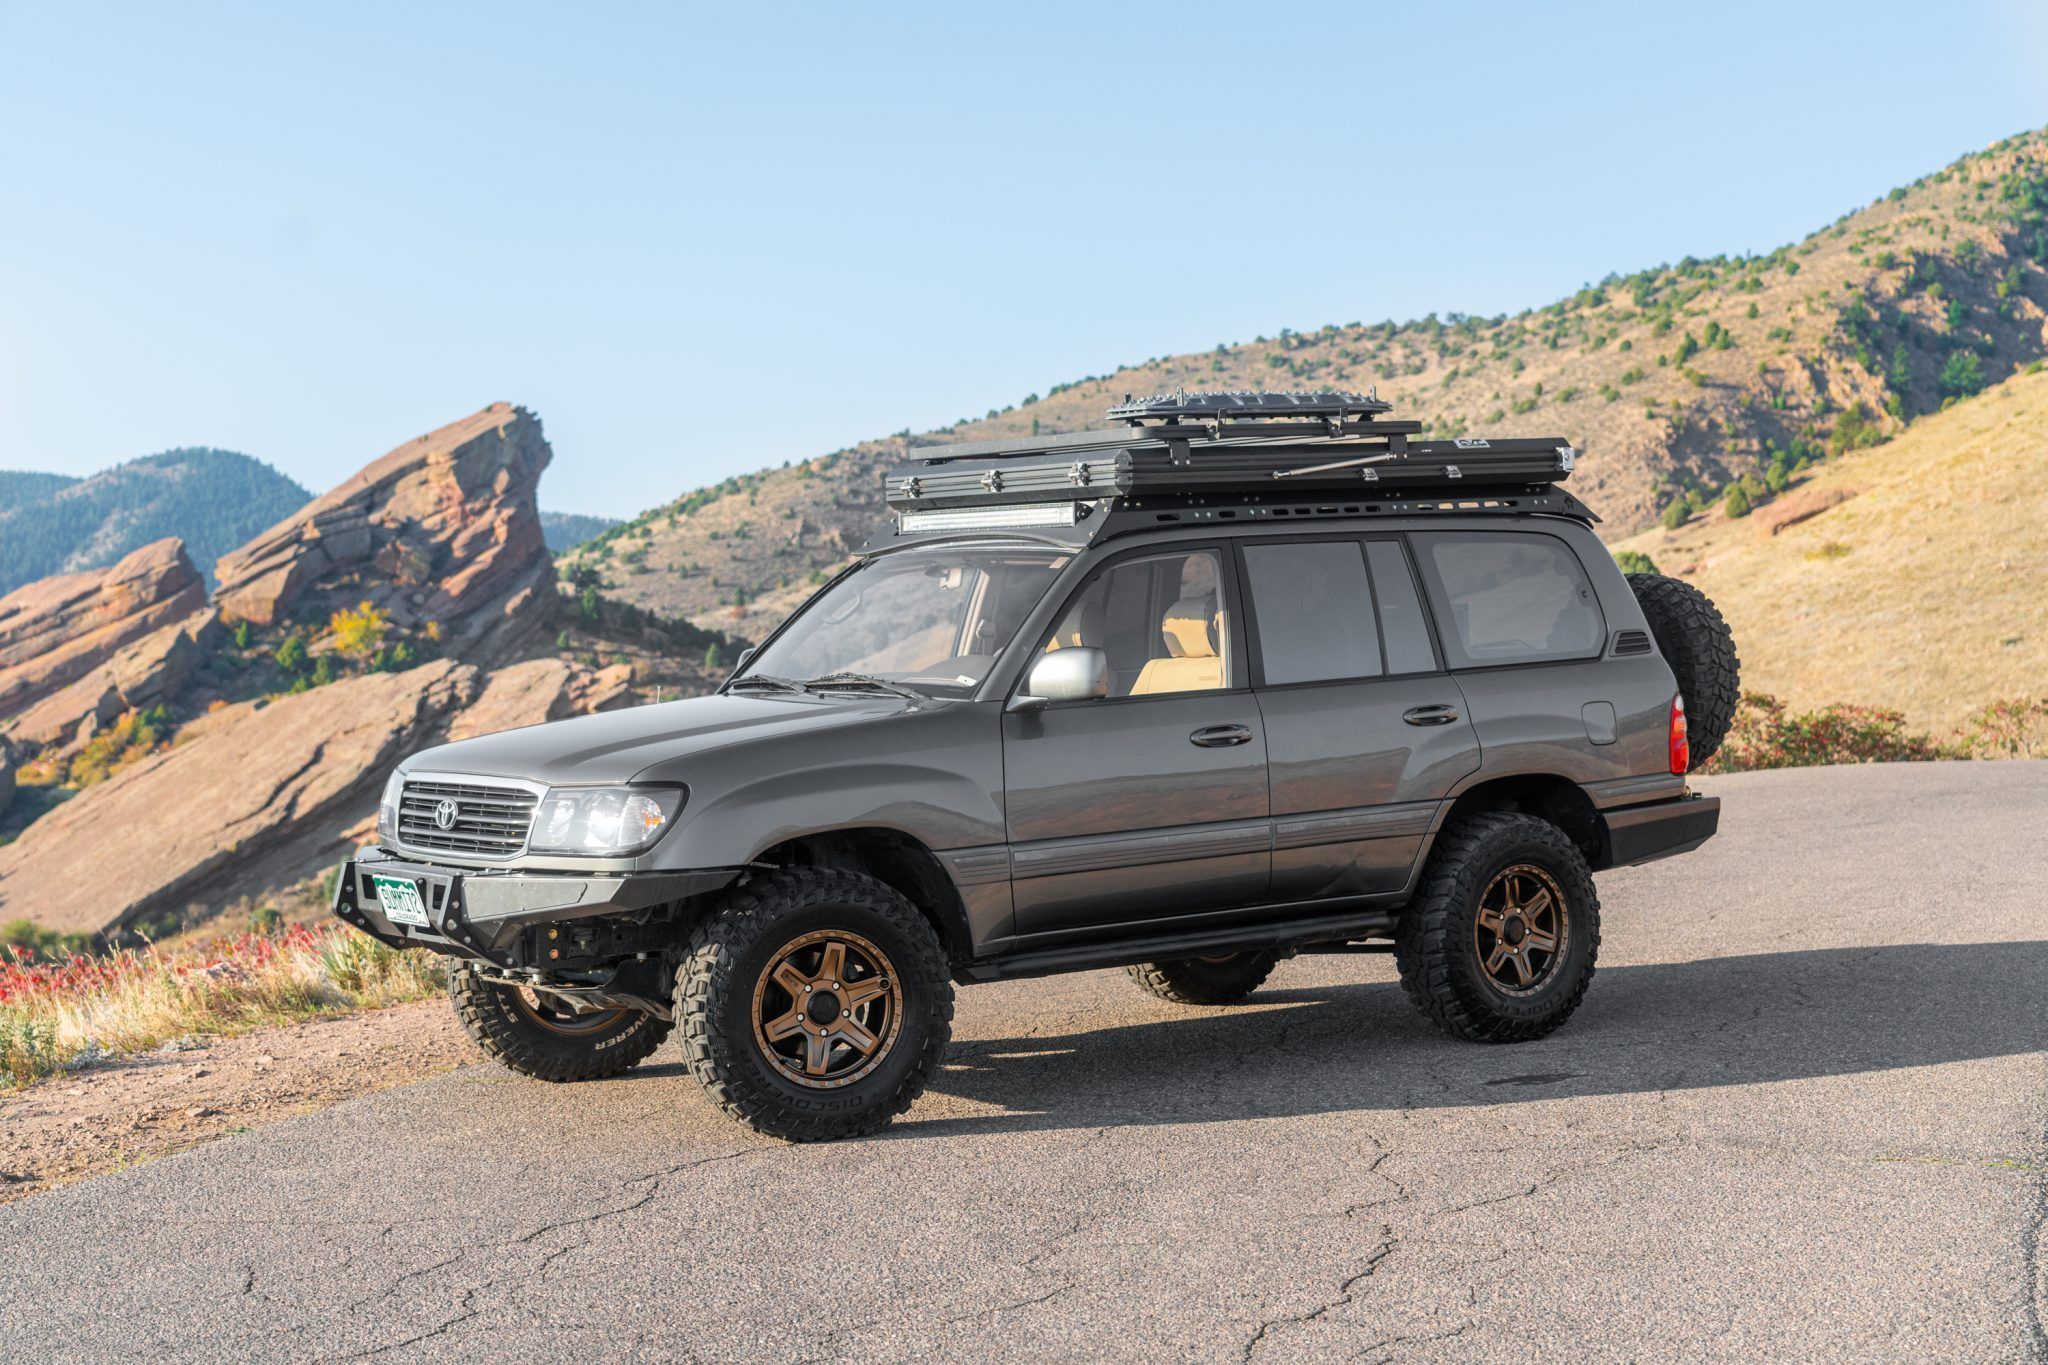 This Awesome Toyota Land Cruiser Is Ready For Overlanding